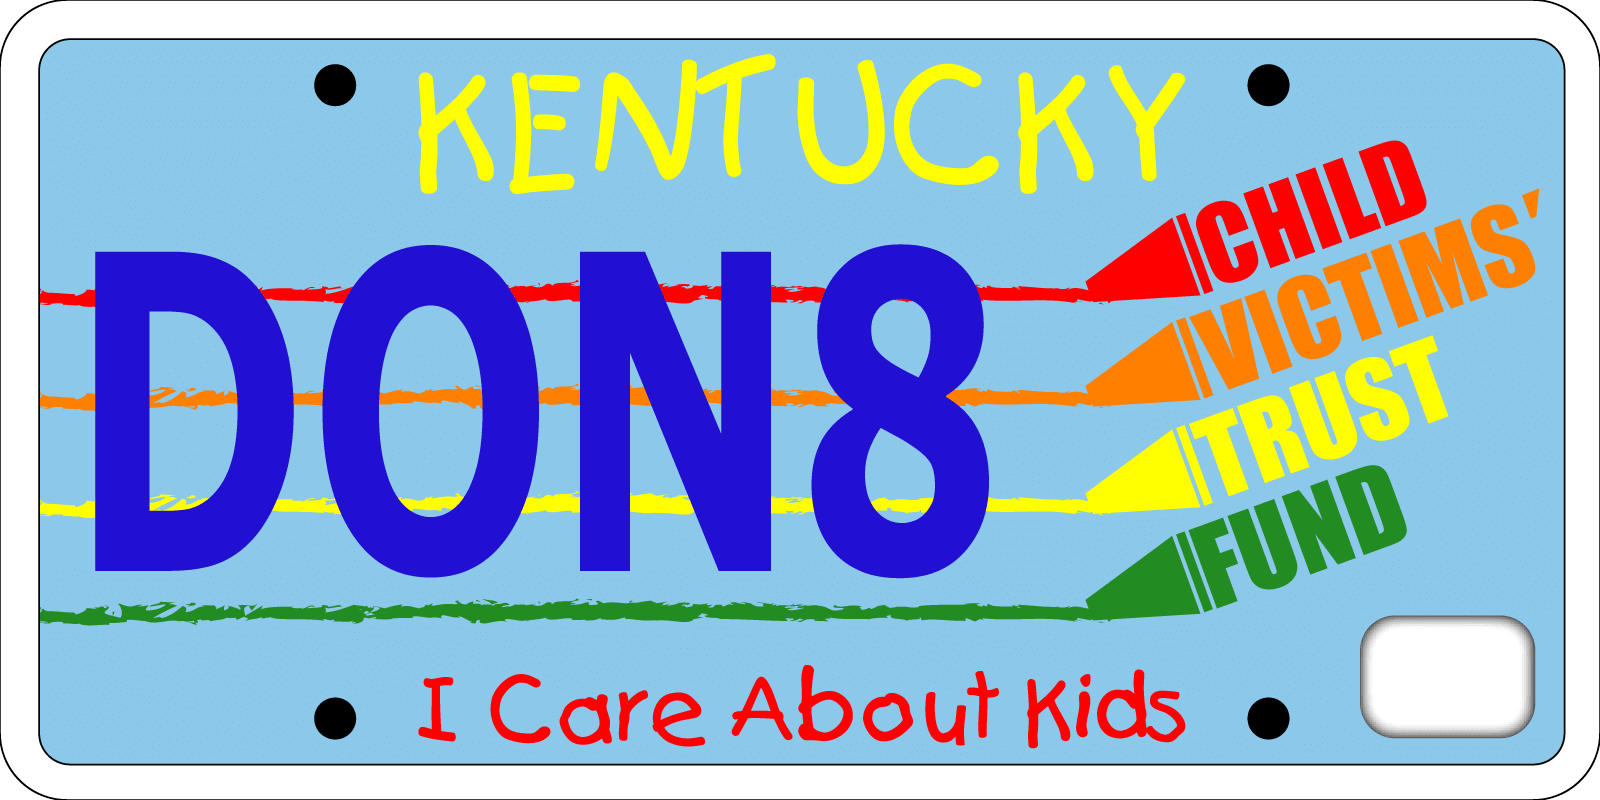 I care about kids Kentucky license plate